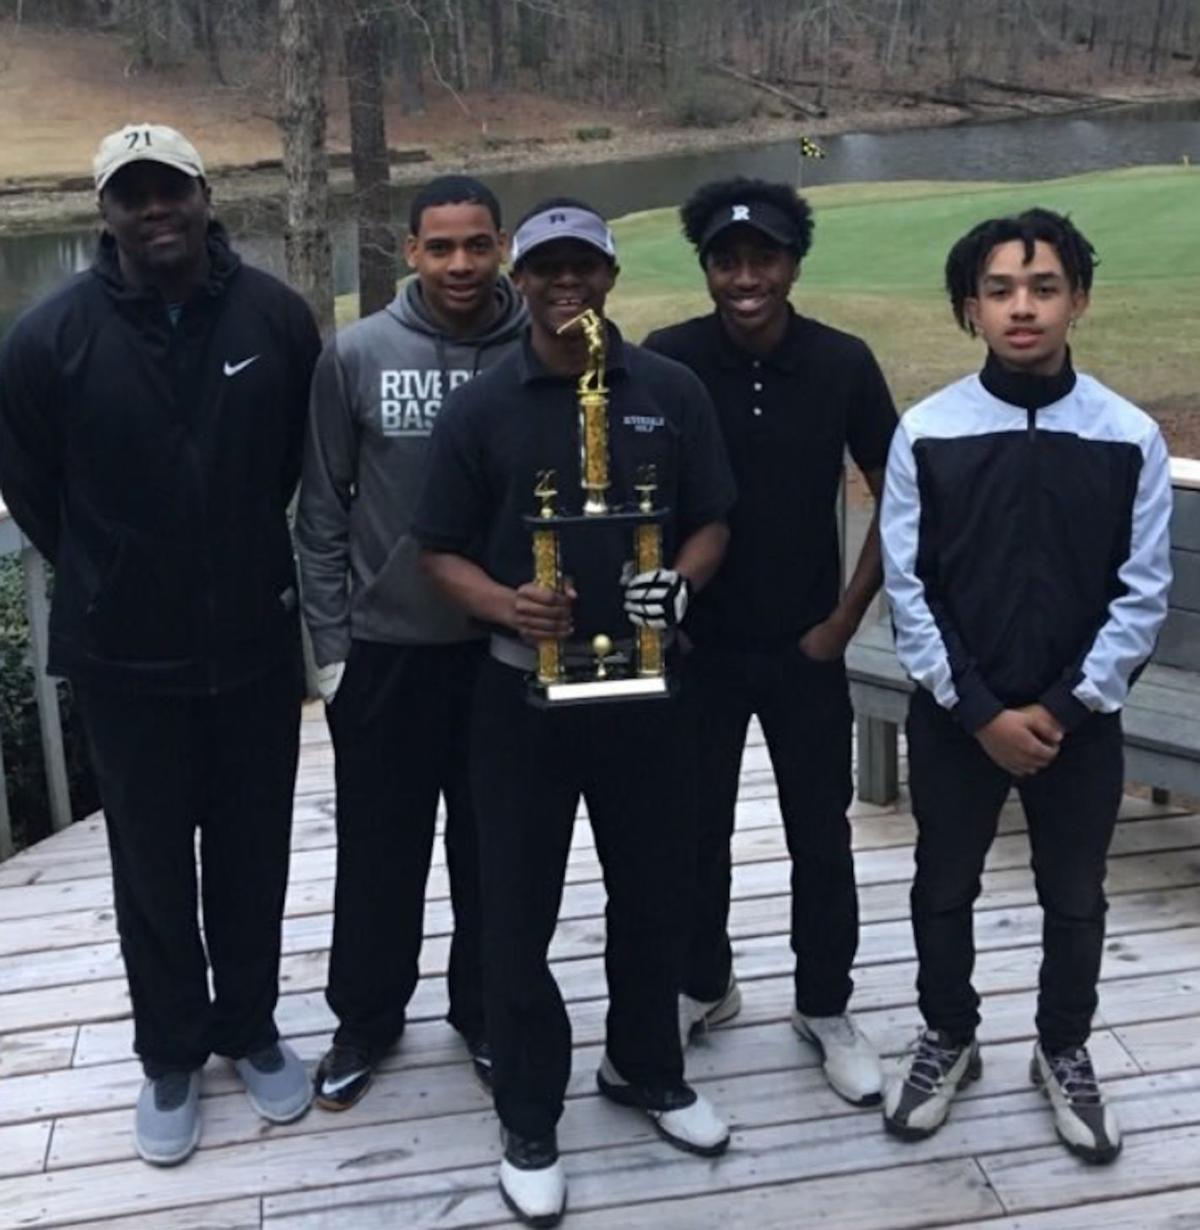 GOLF: Riverdale sweeps county championships; Nia Cole wins fourth straight individual championship